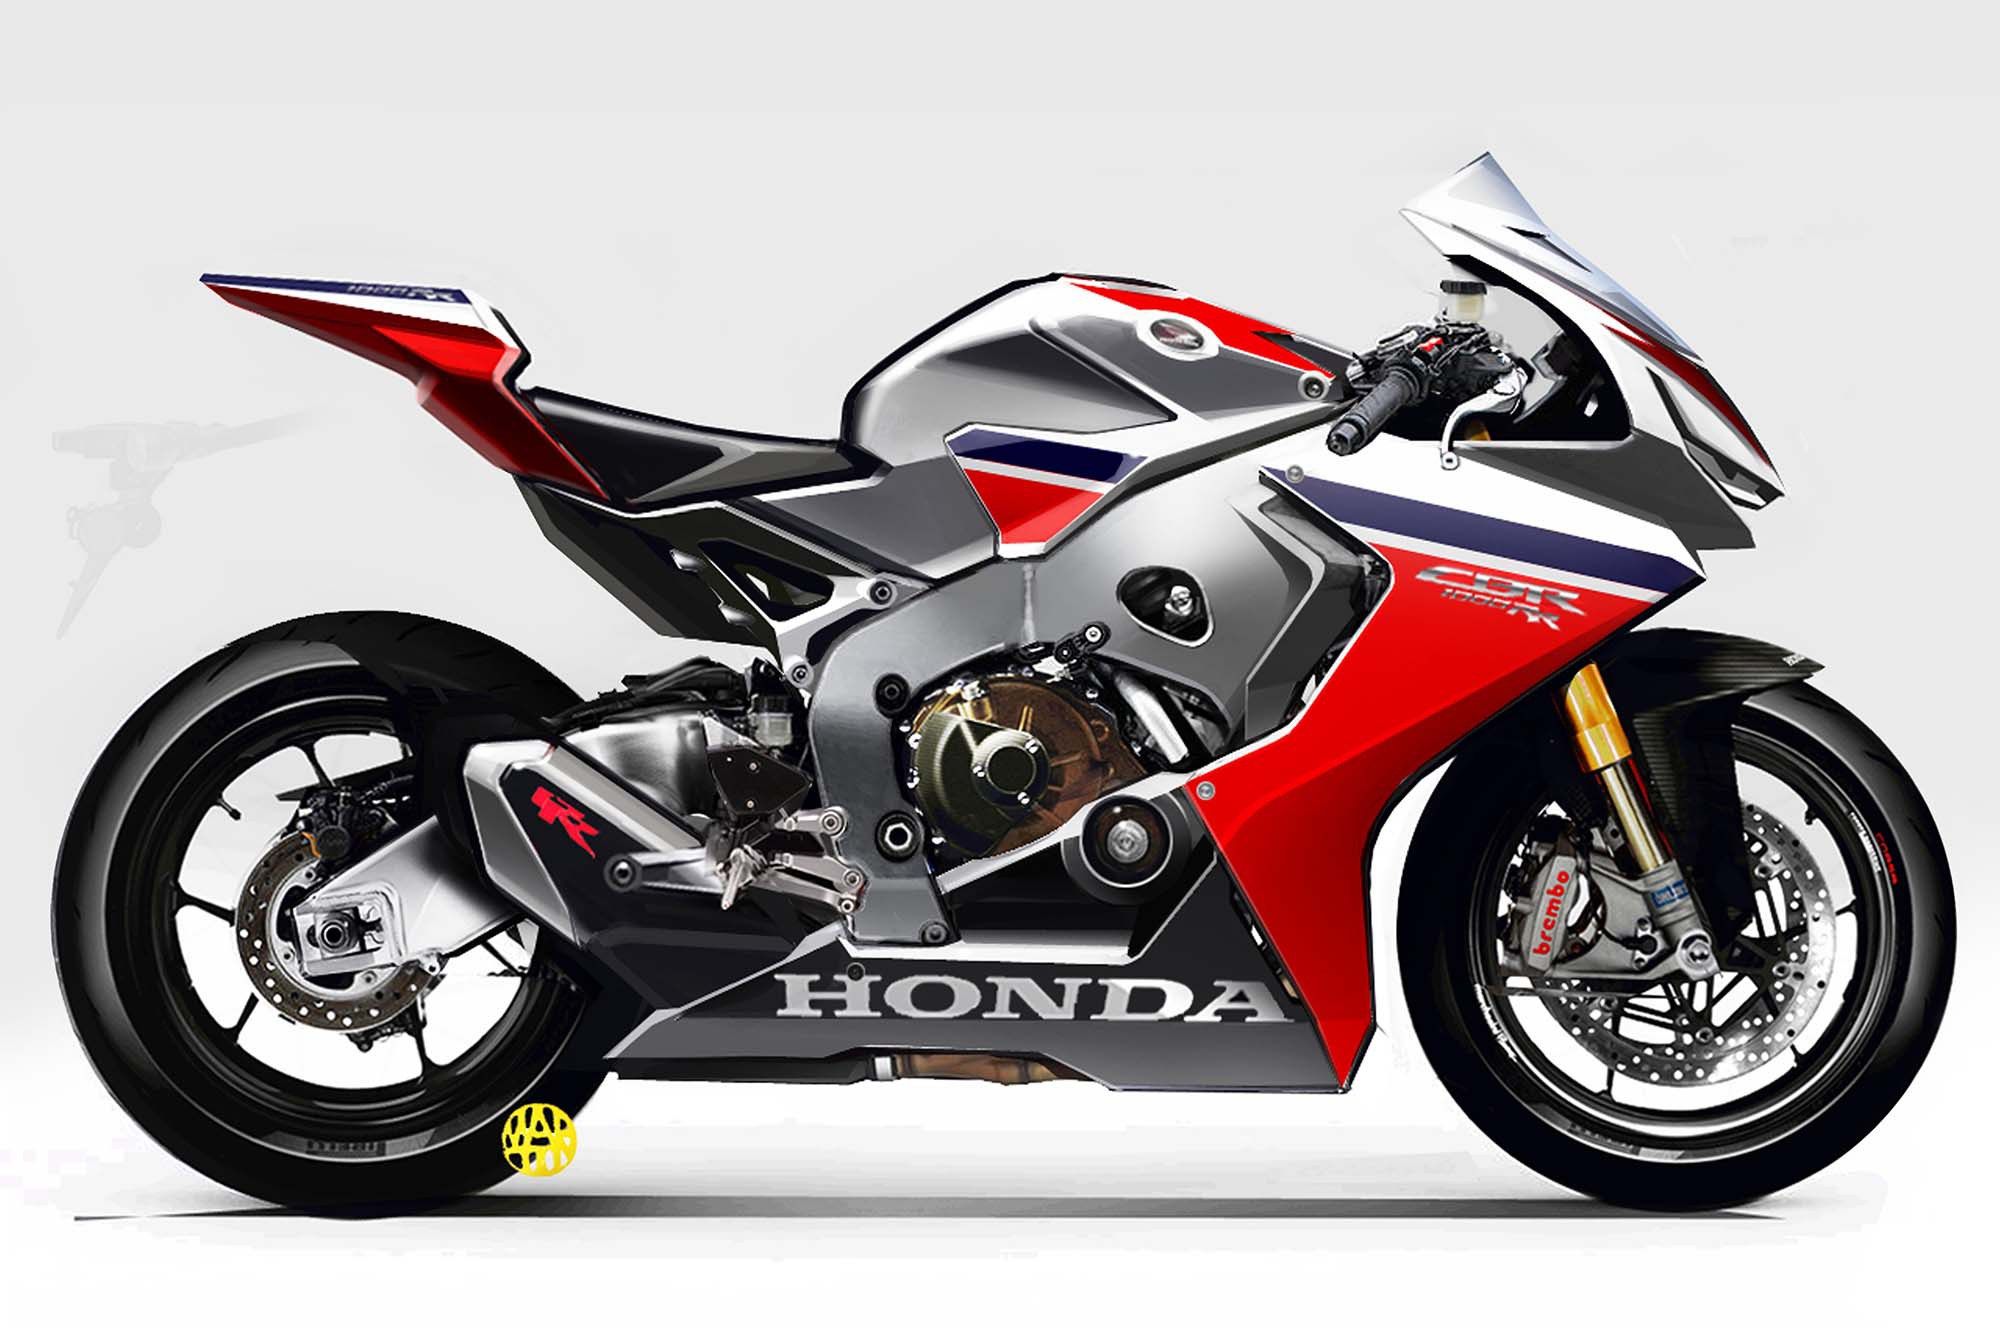 2017 Honda CBR1000RR - stop sale and safety recall. Photo: Asphalt and Rubber